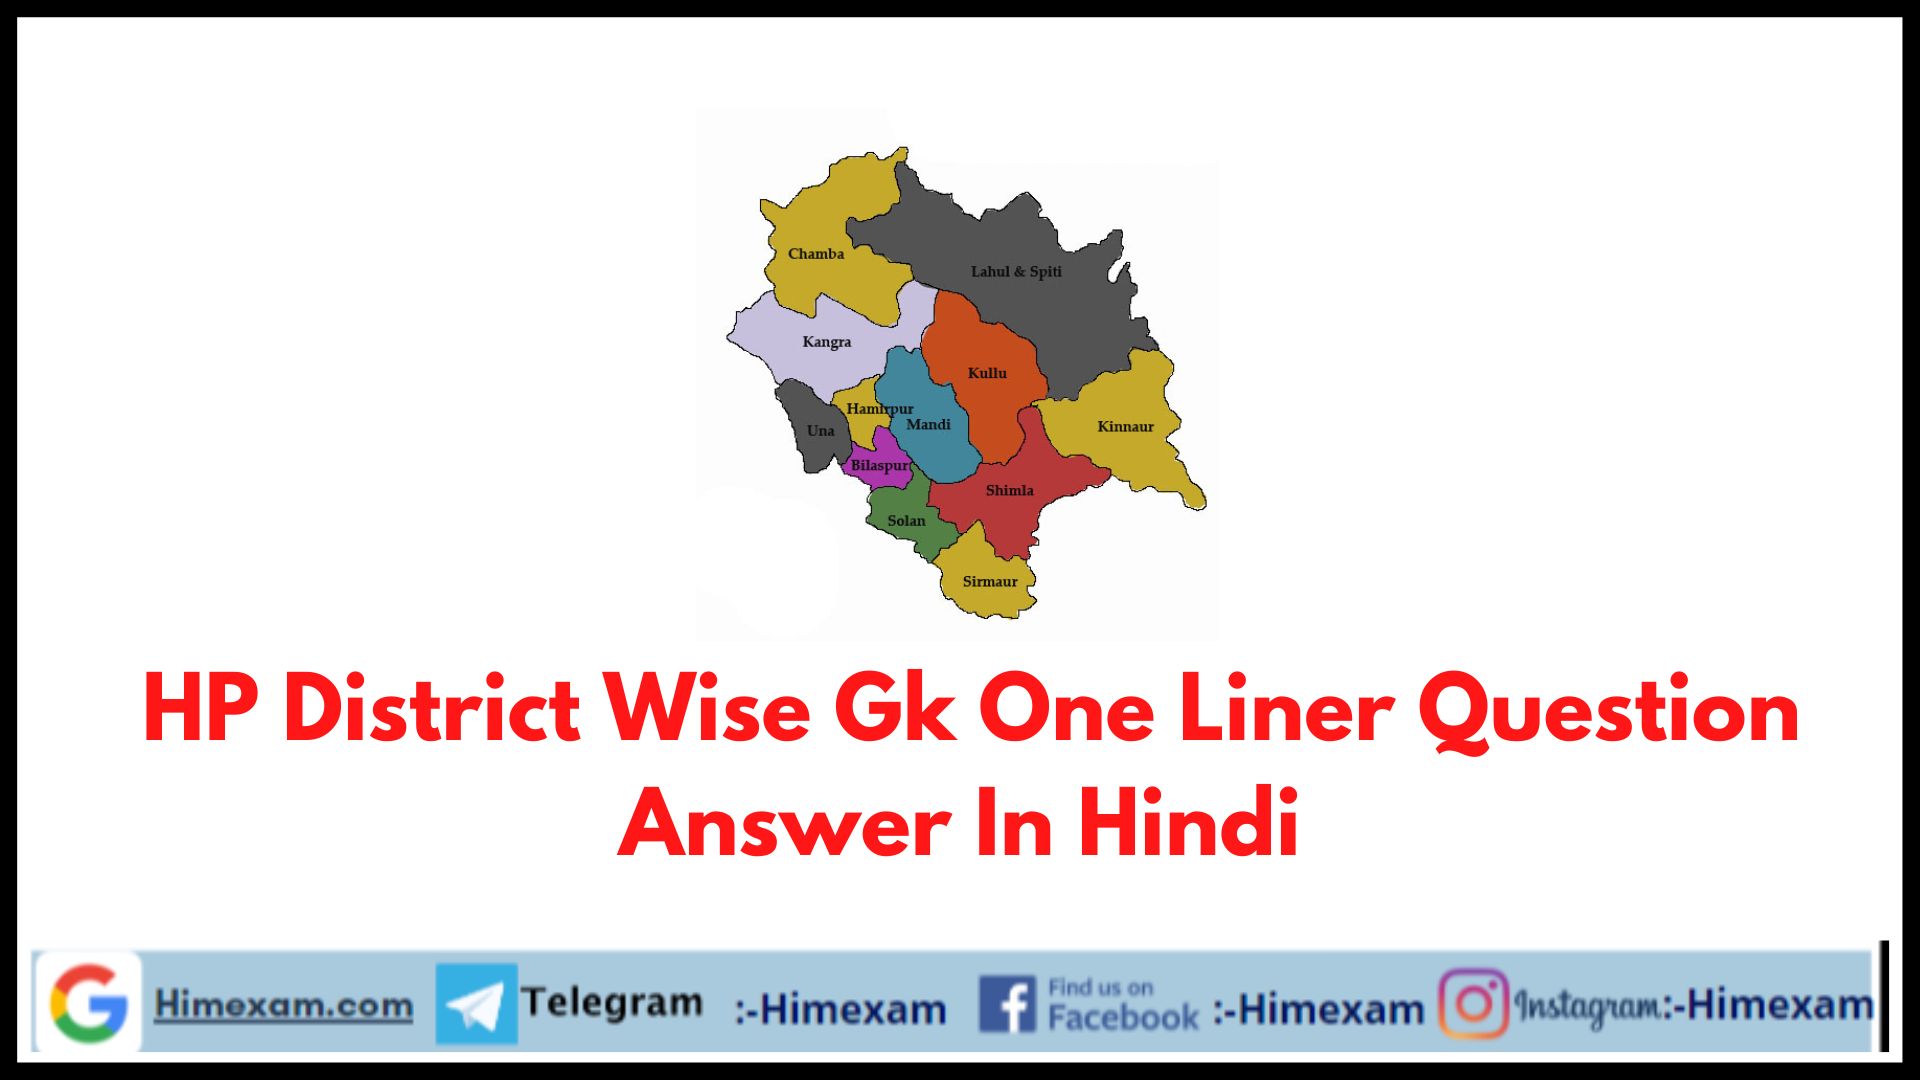 HP District Wise Gk One Liner Question Answer In Hindi